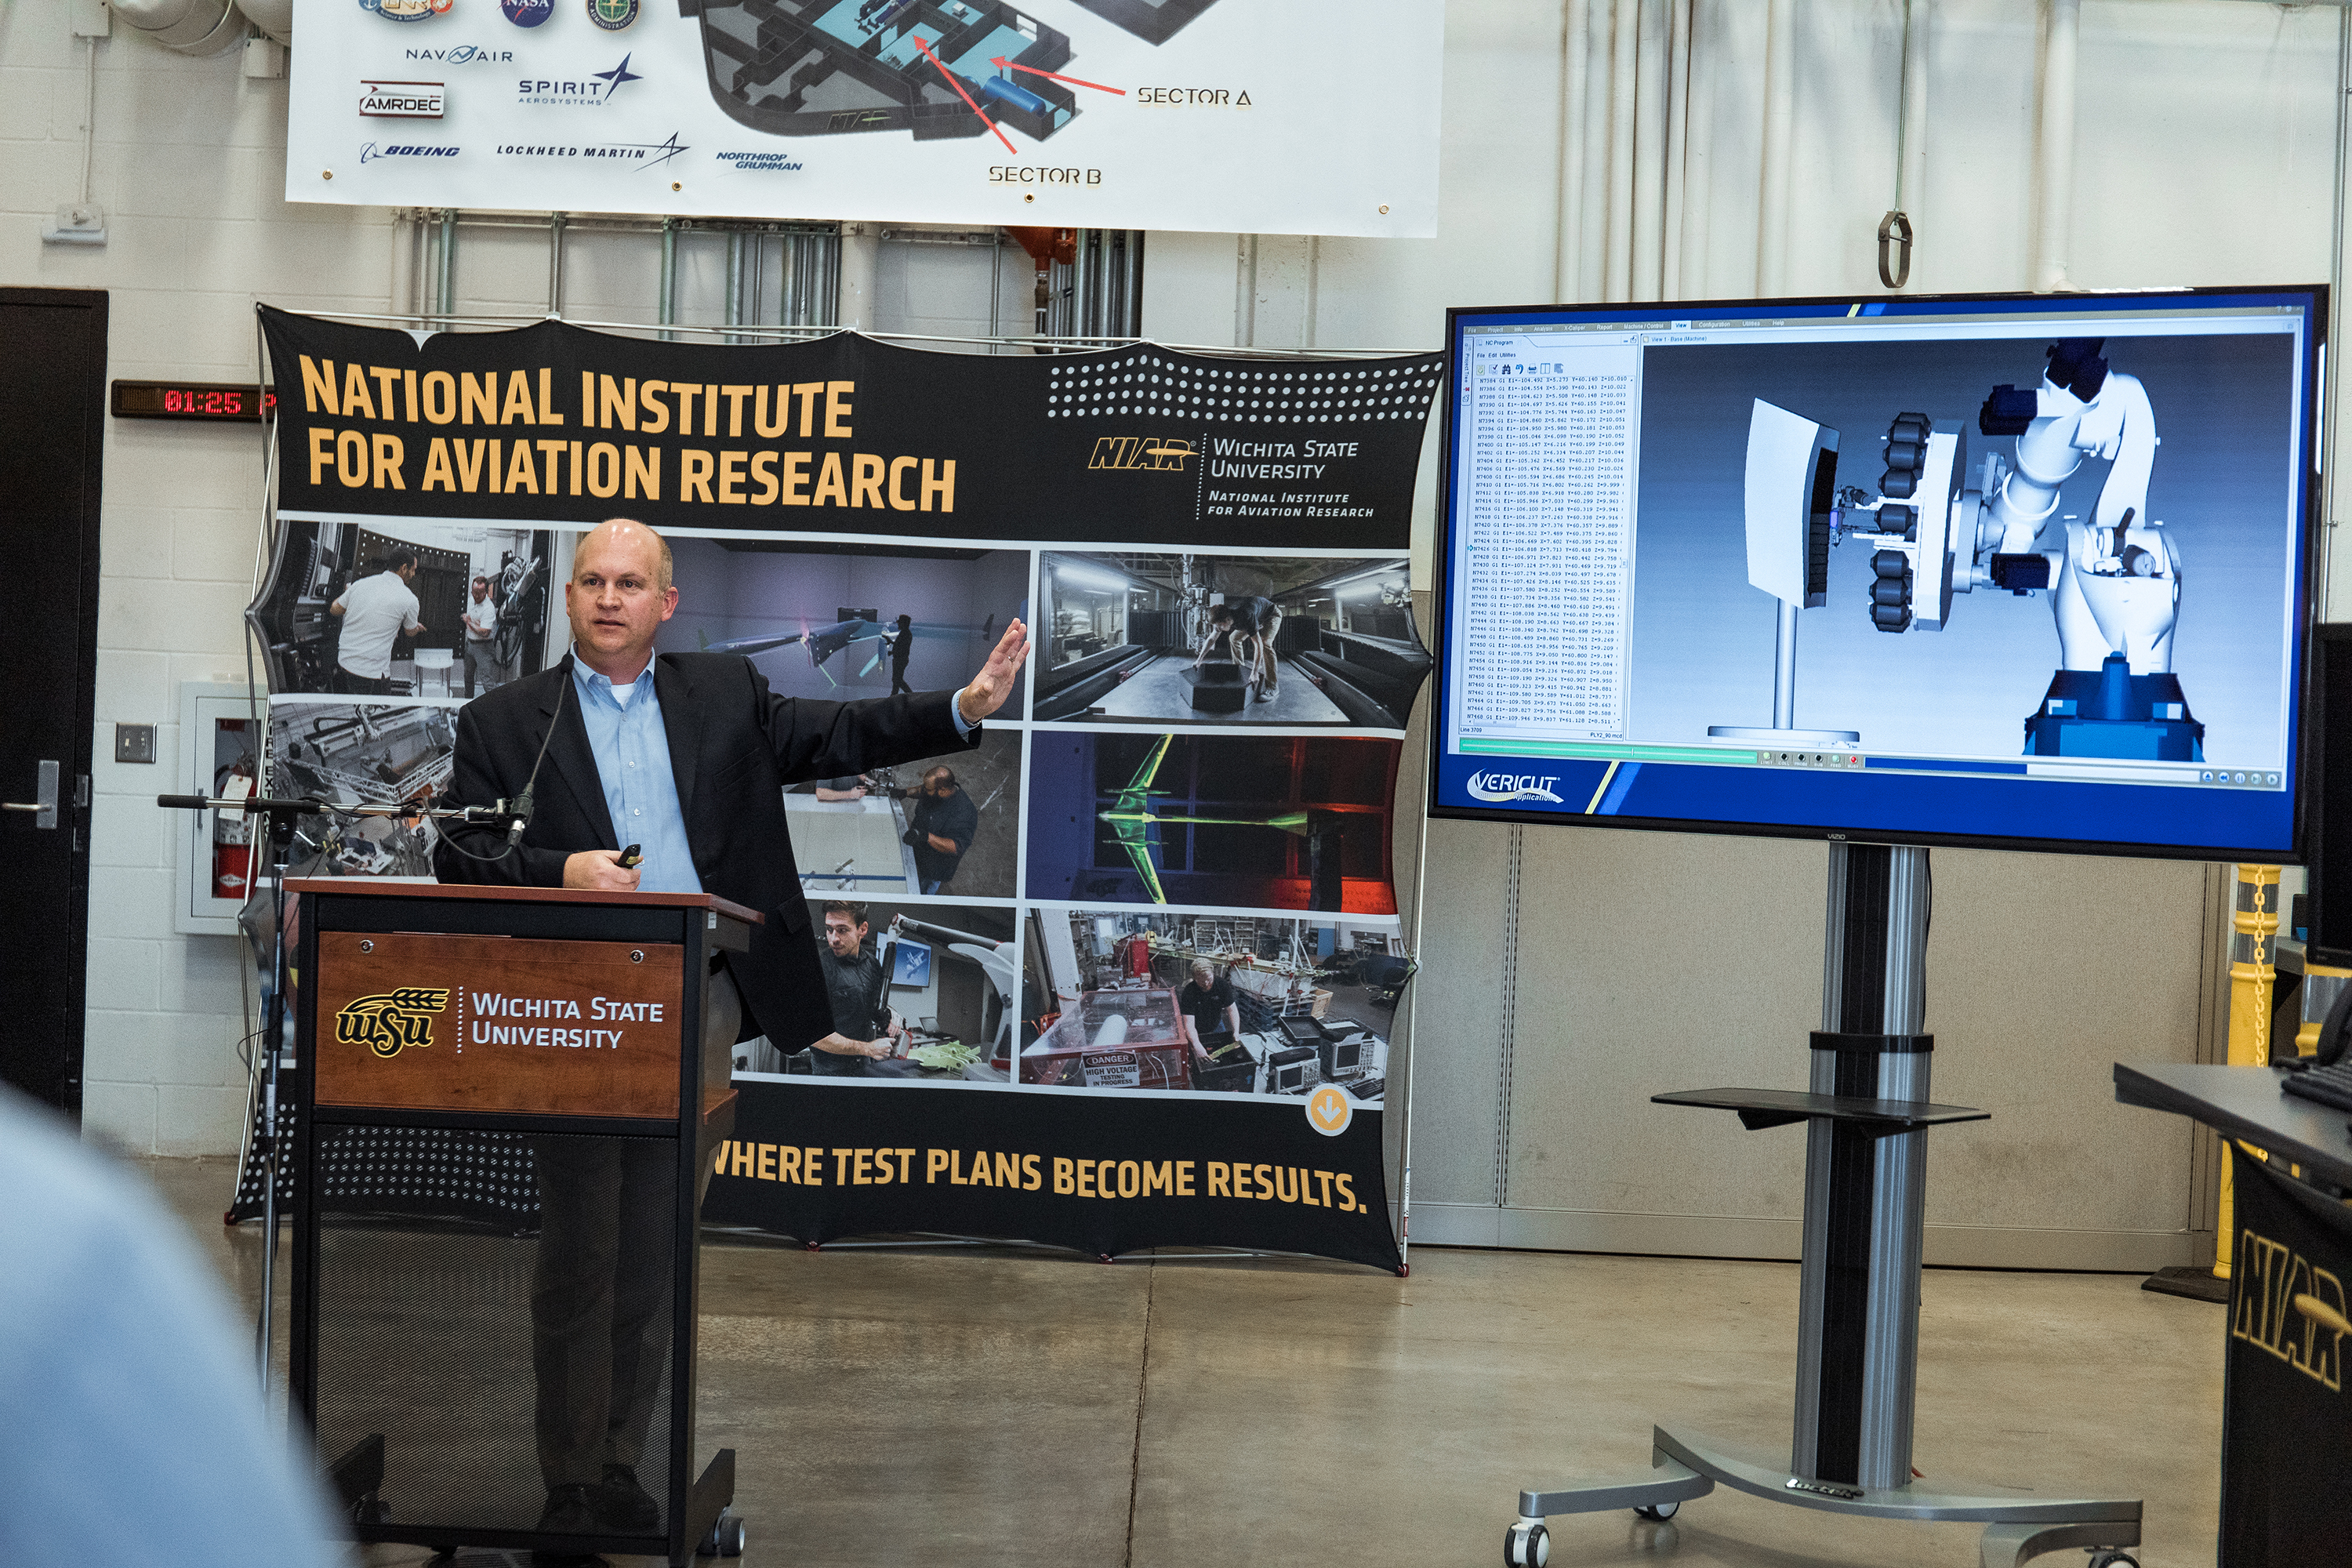 John Tomblin discusses the $2 million grant awarded to Wichita State to fund advanced composites technology.